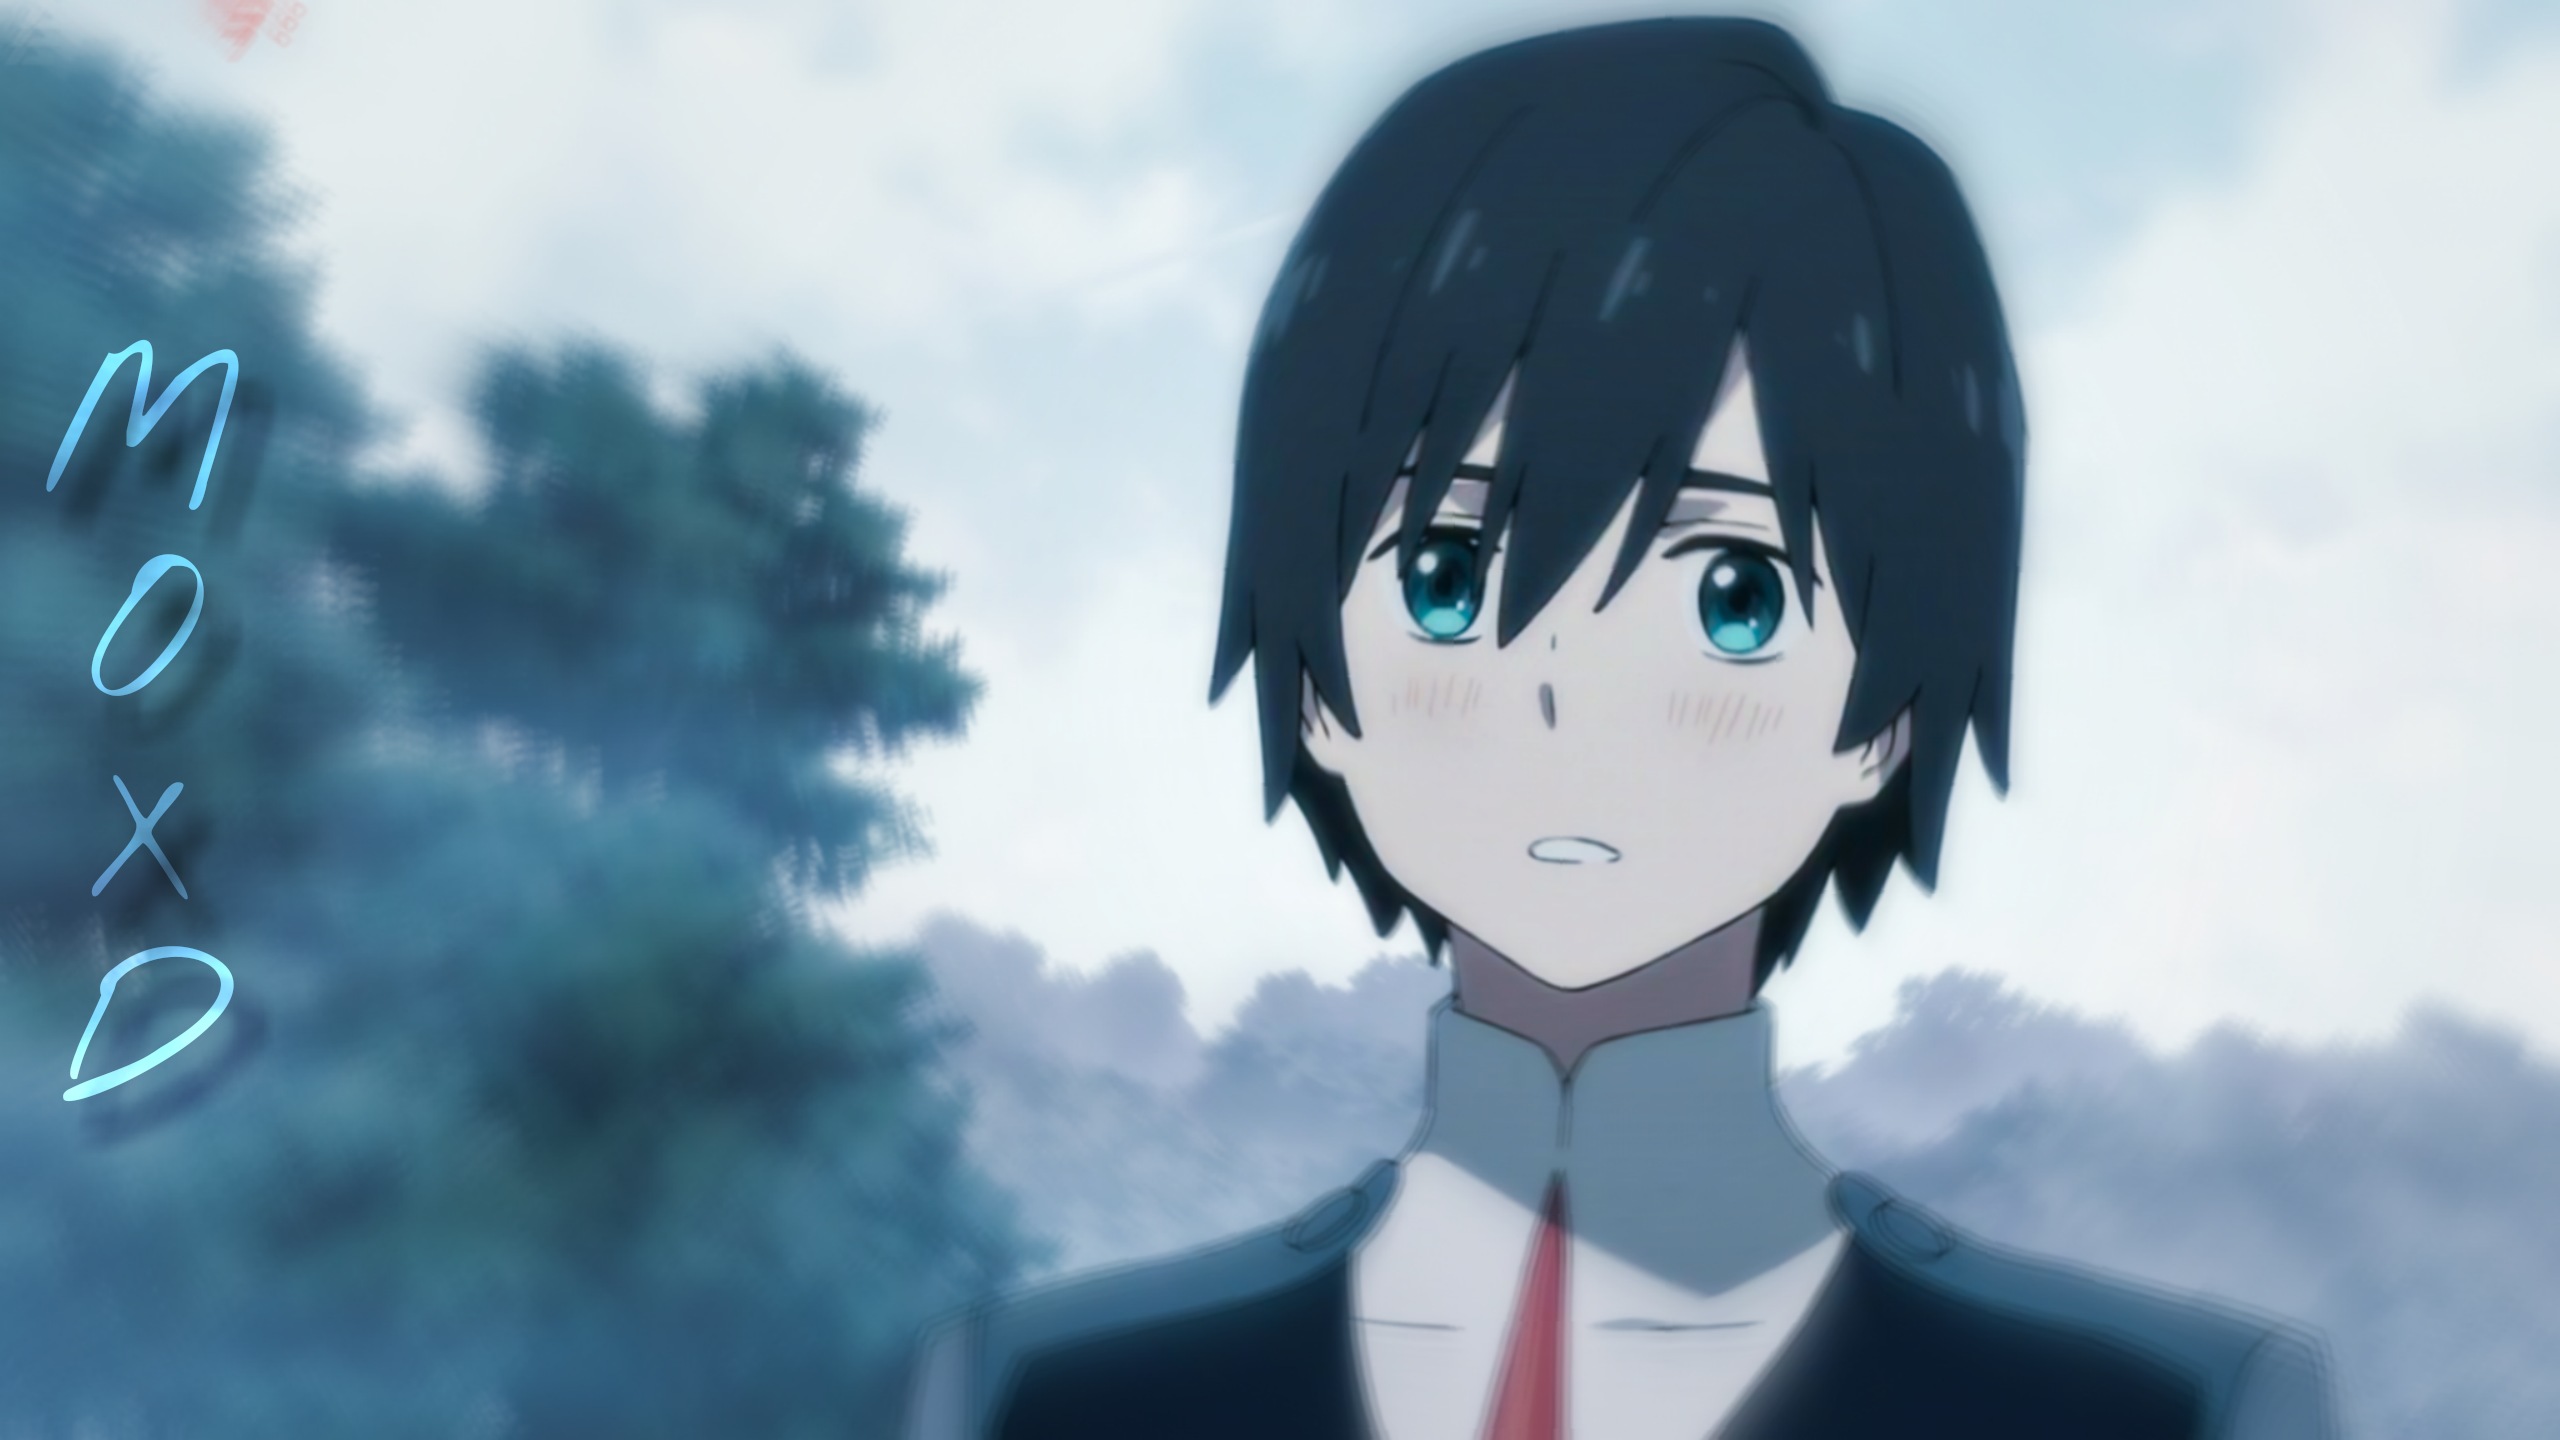 Largest Collection of Free-to-Edit #hiro Images